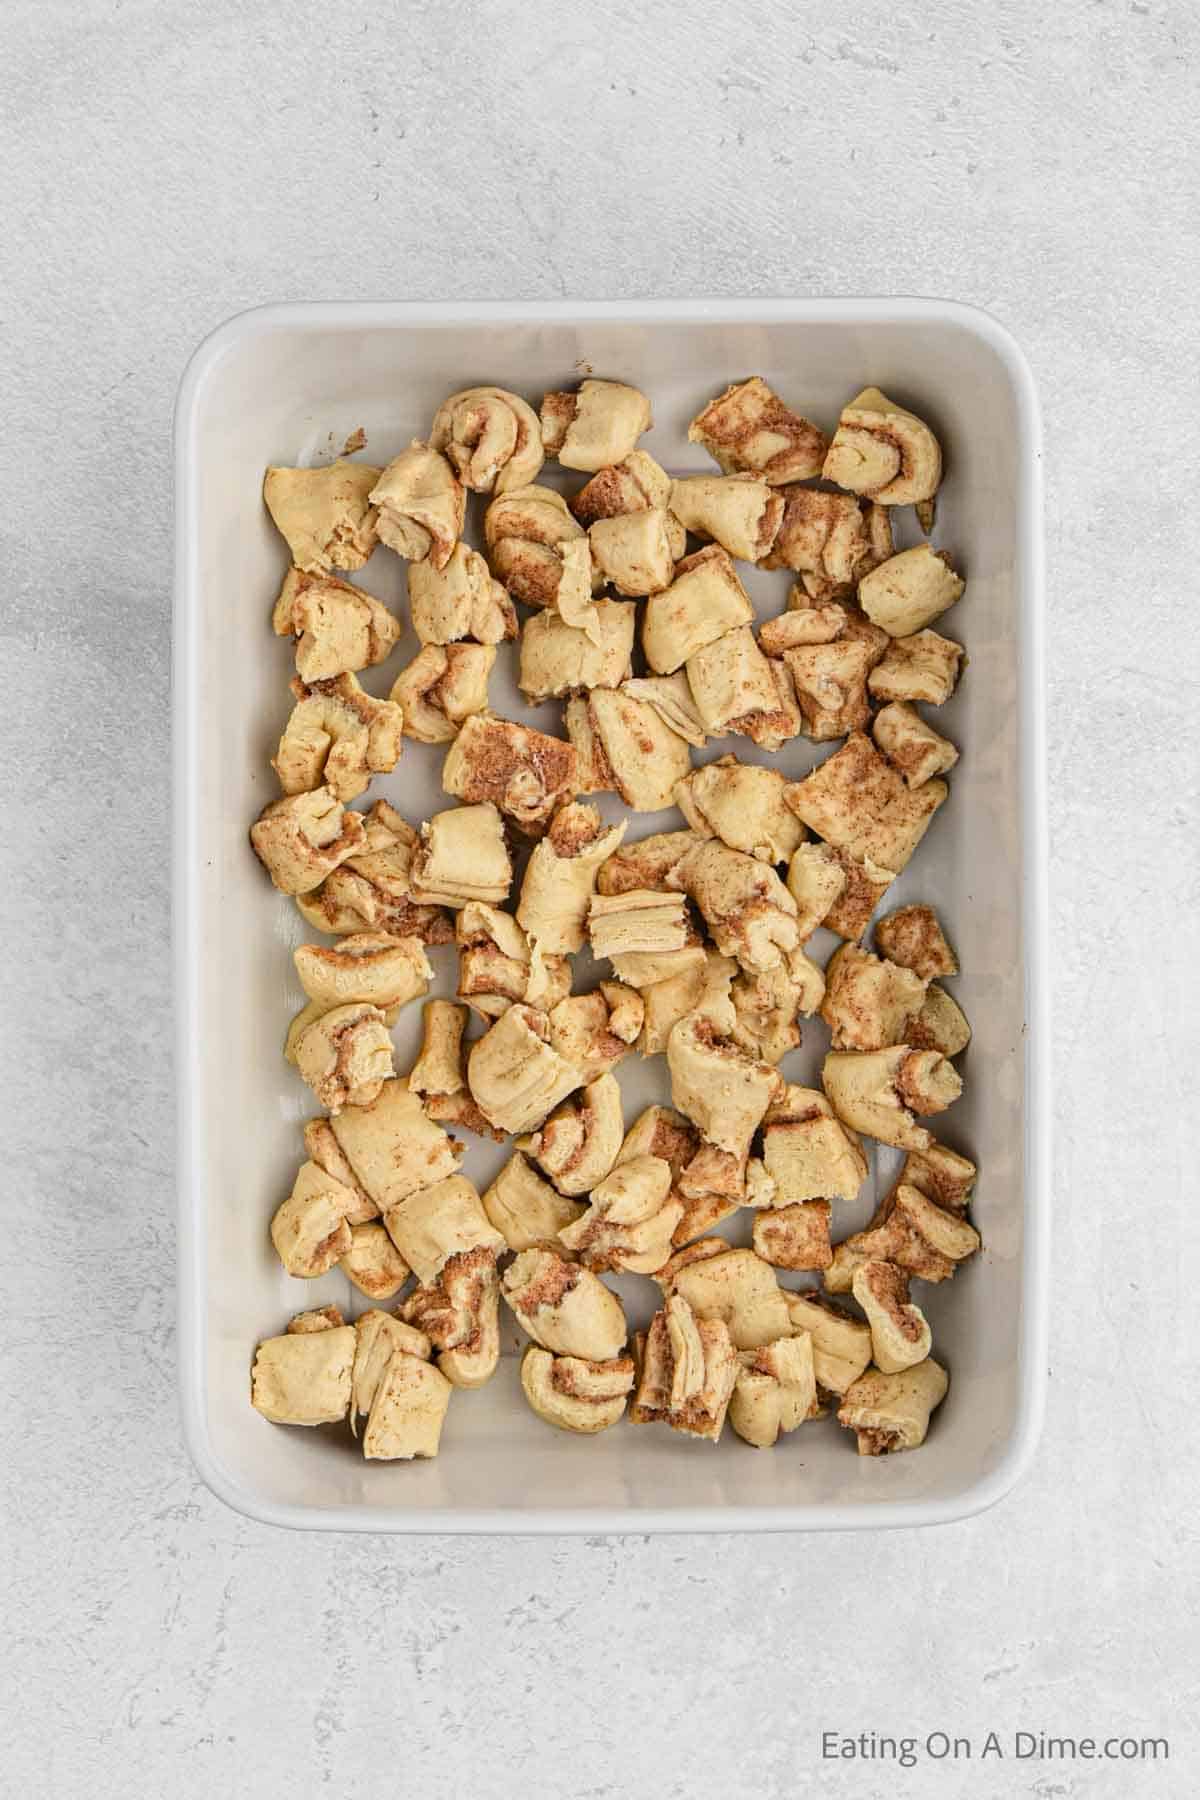 Placing the cinnamon roll pieces in a casserole dish